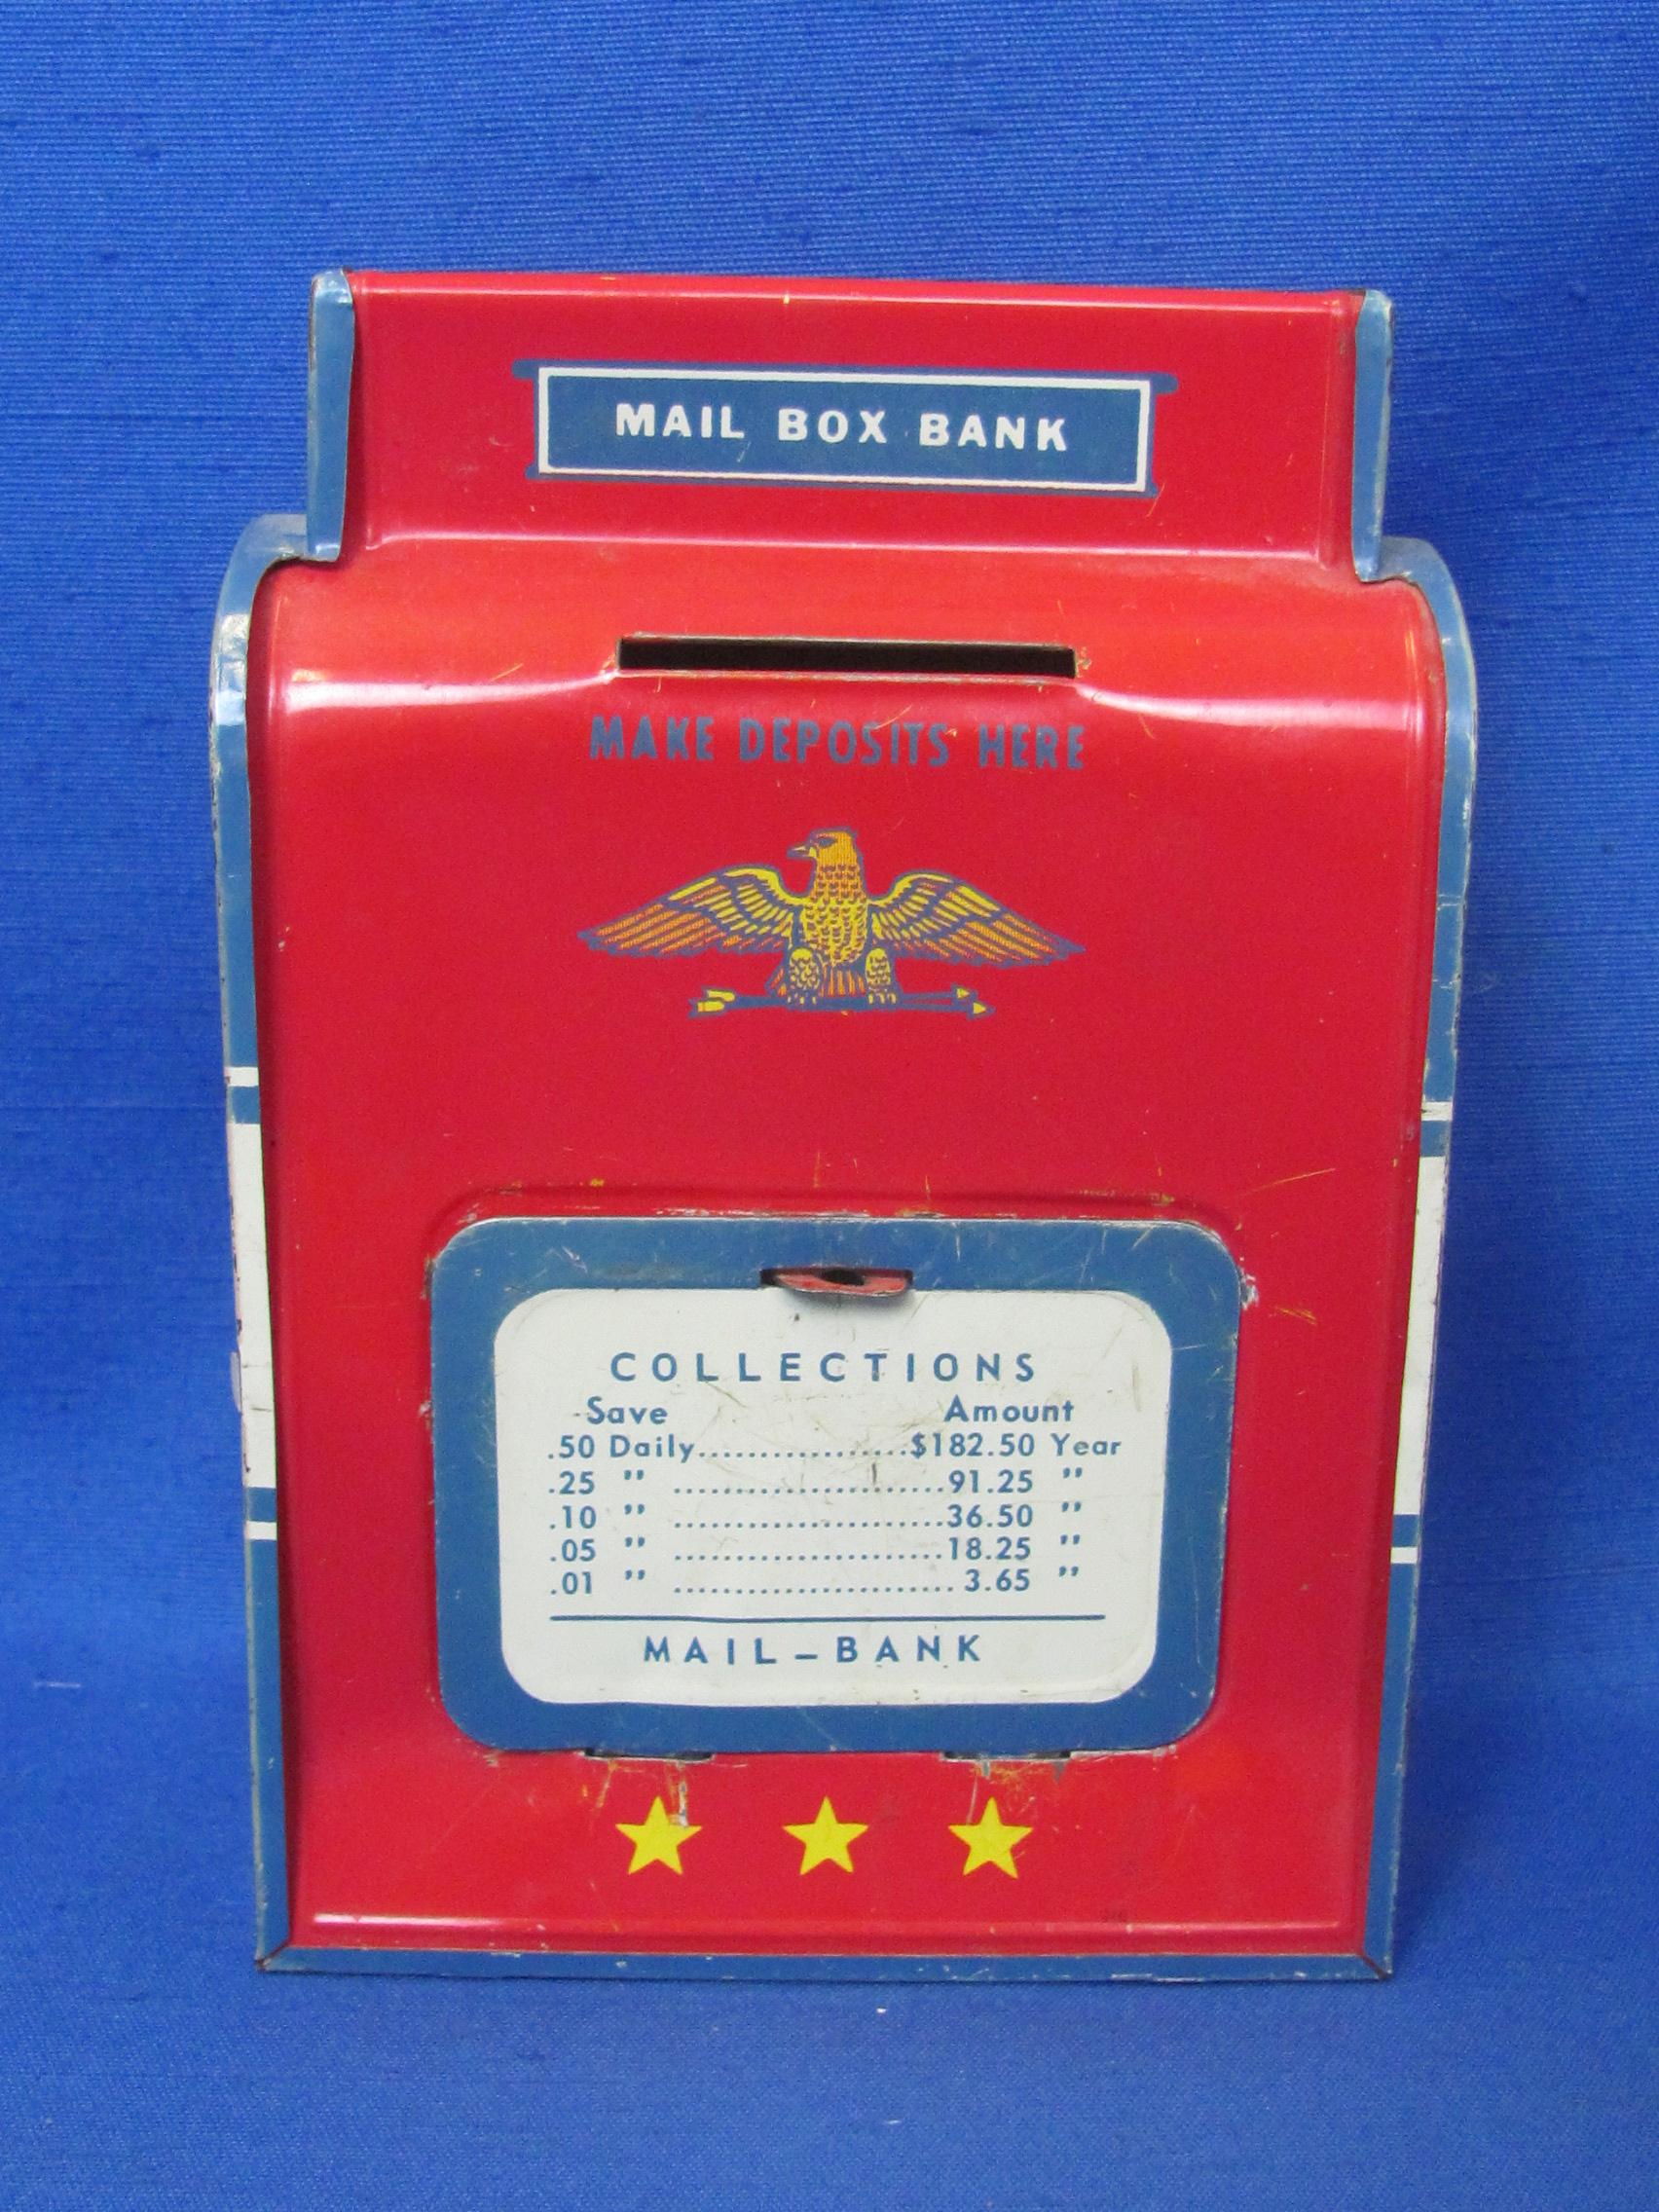 Tin Mail Box Bank by the Ohio Art Co. - 6” tall – Can be wall mounted